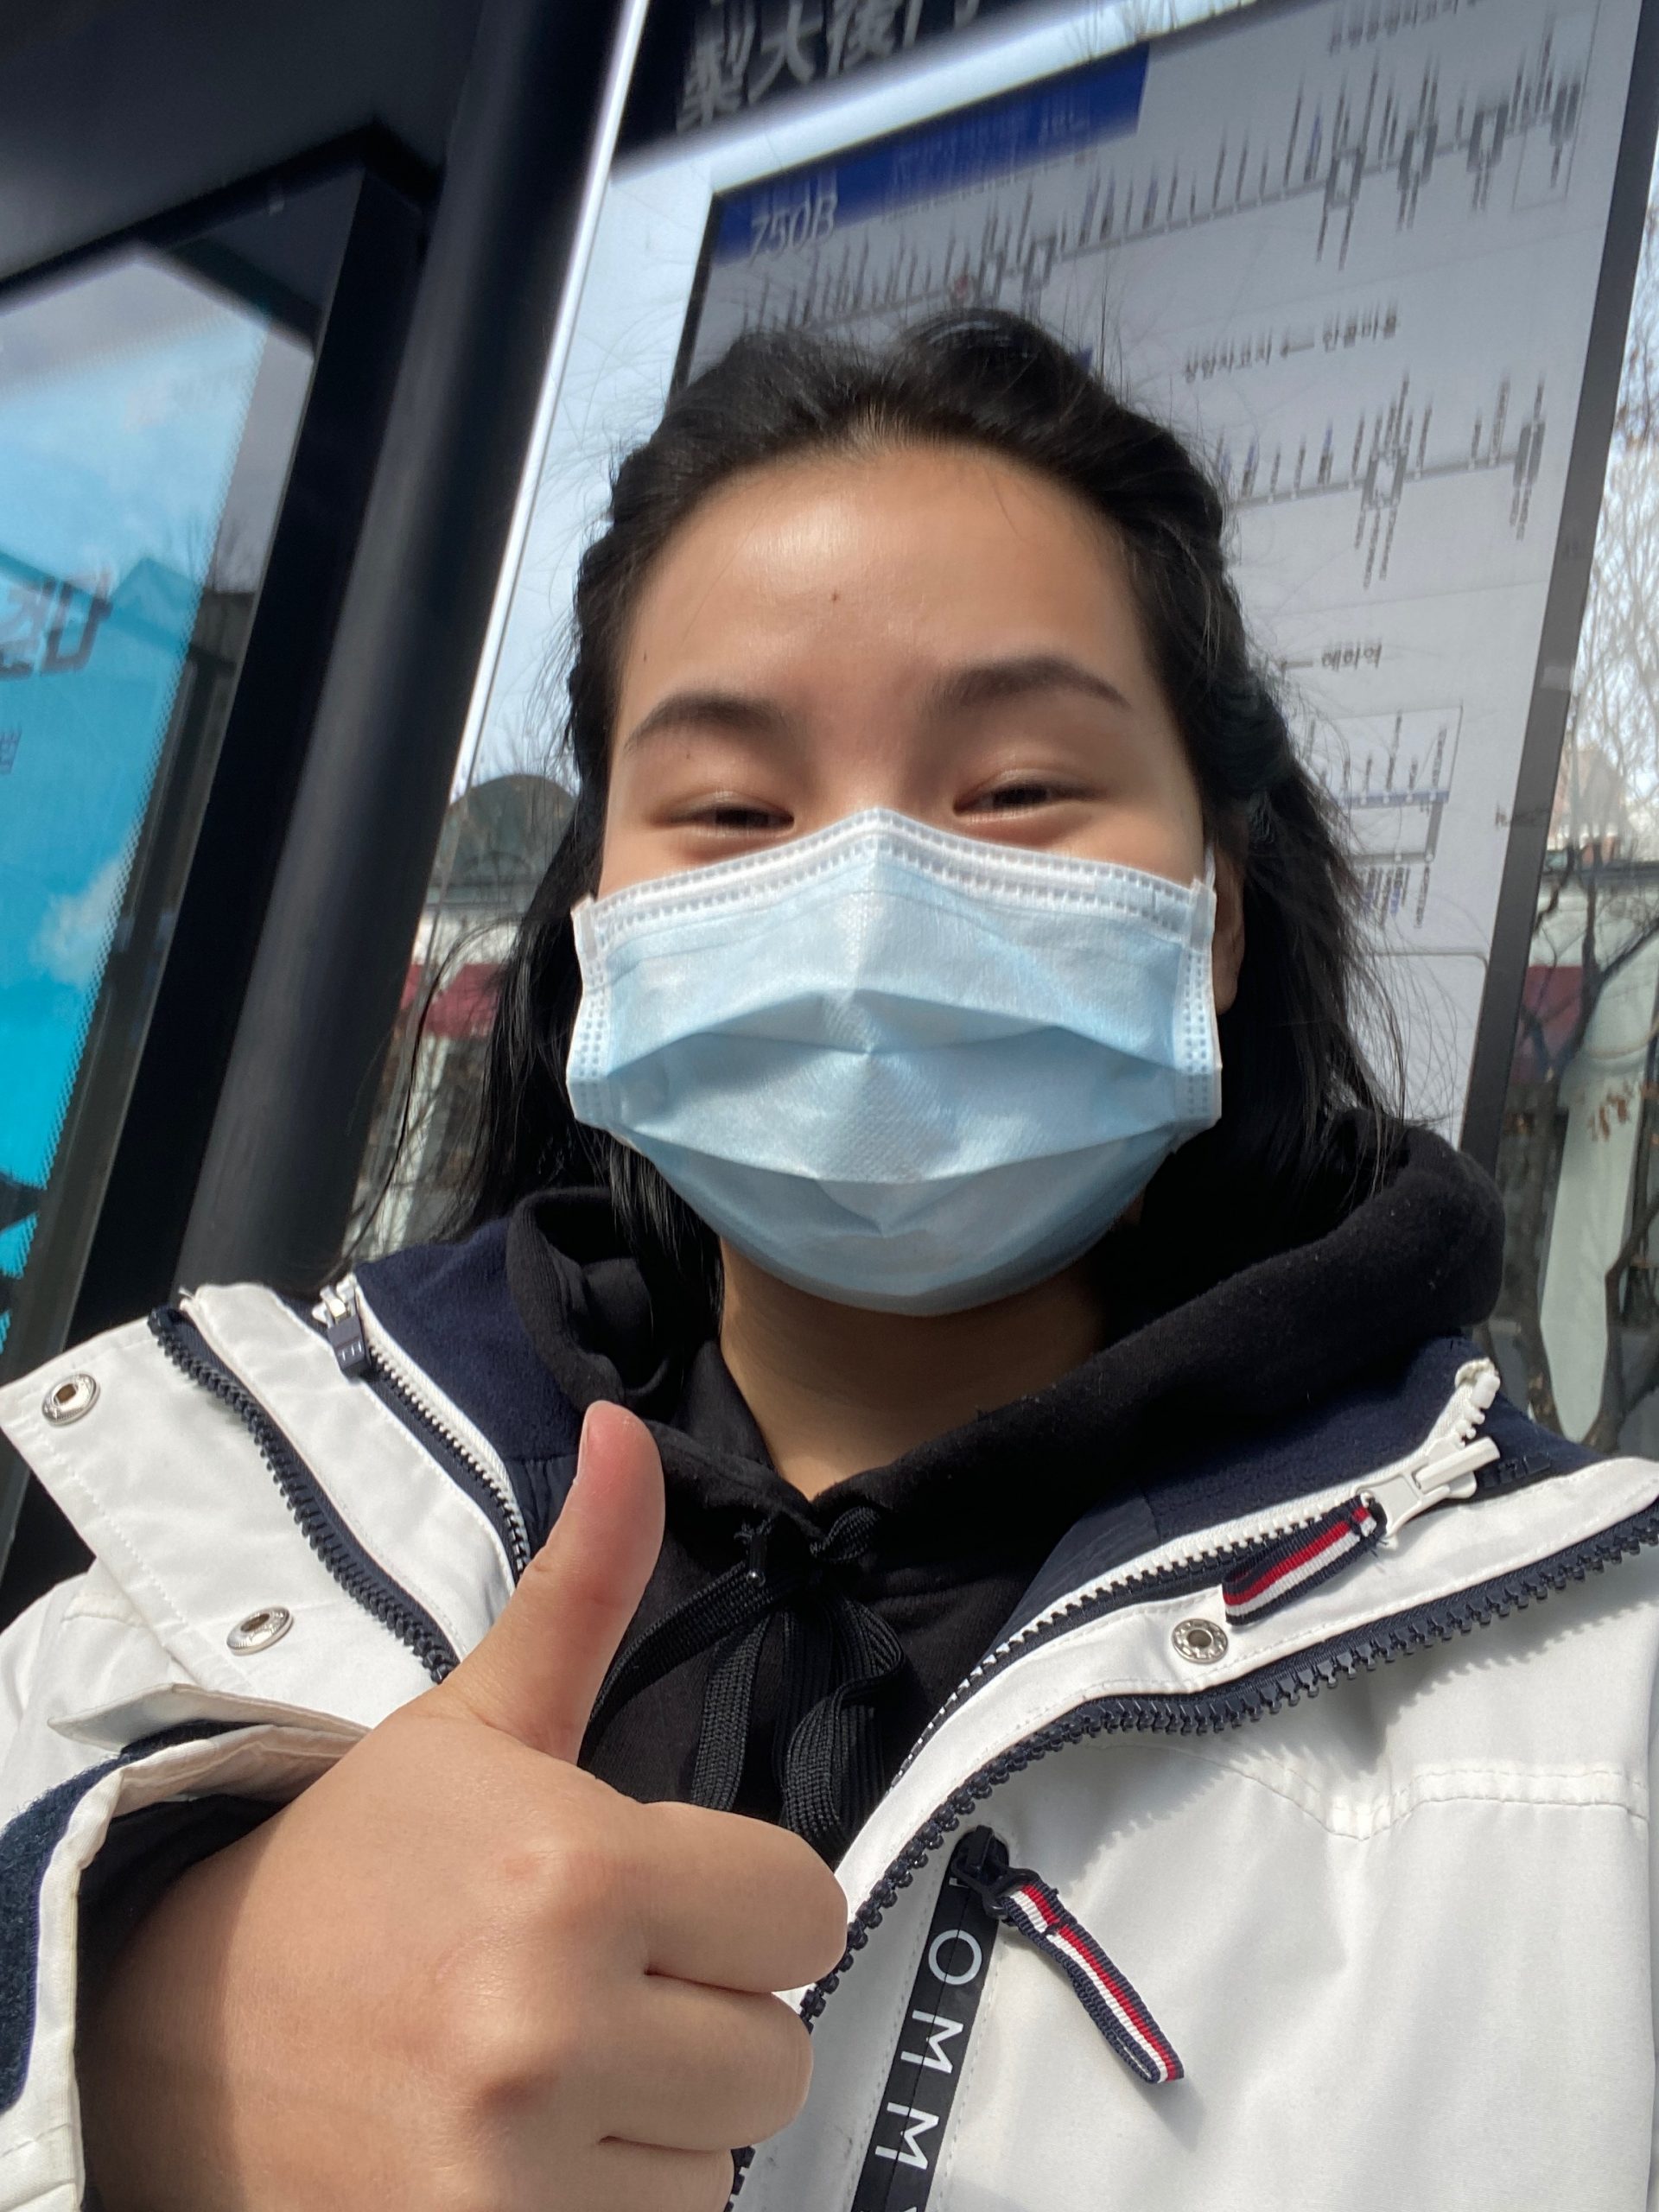 Me showing a thumbs up outside a bus stop, wearing a mask.